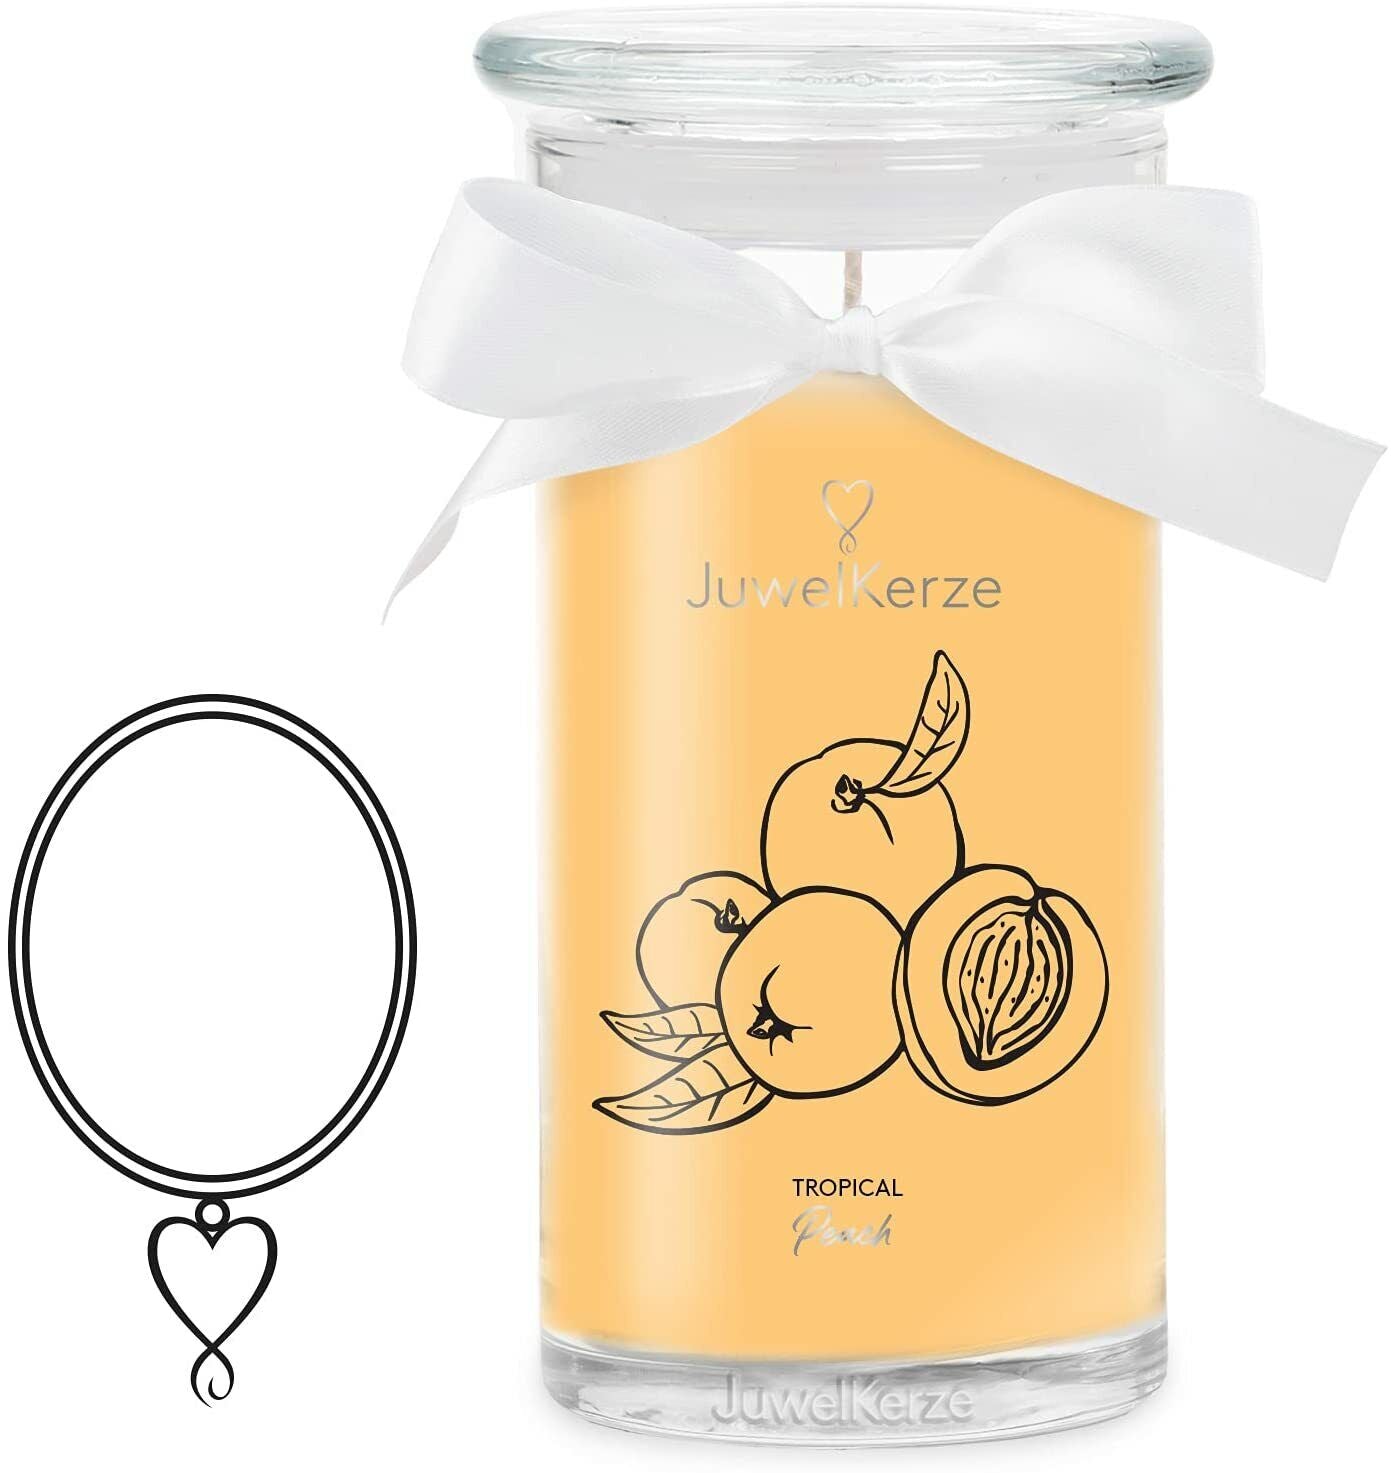 Jewelcandle Tropical Peach Scented Candle Jar Stainless Sliver Pendant Jewelry